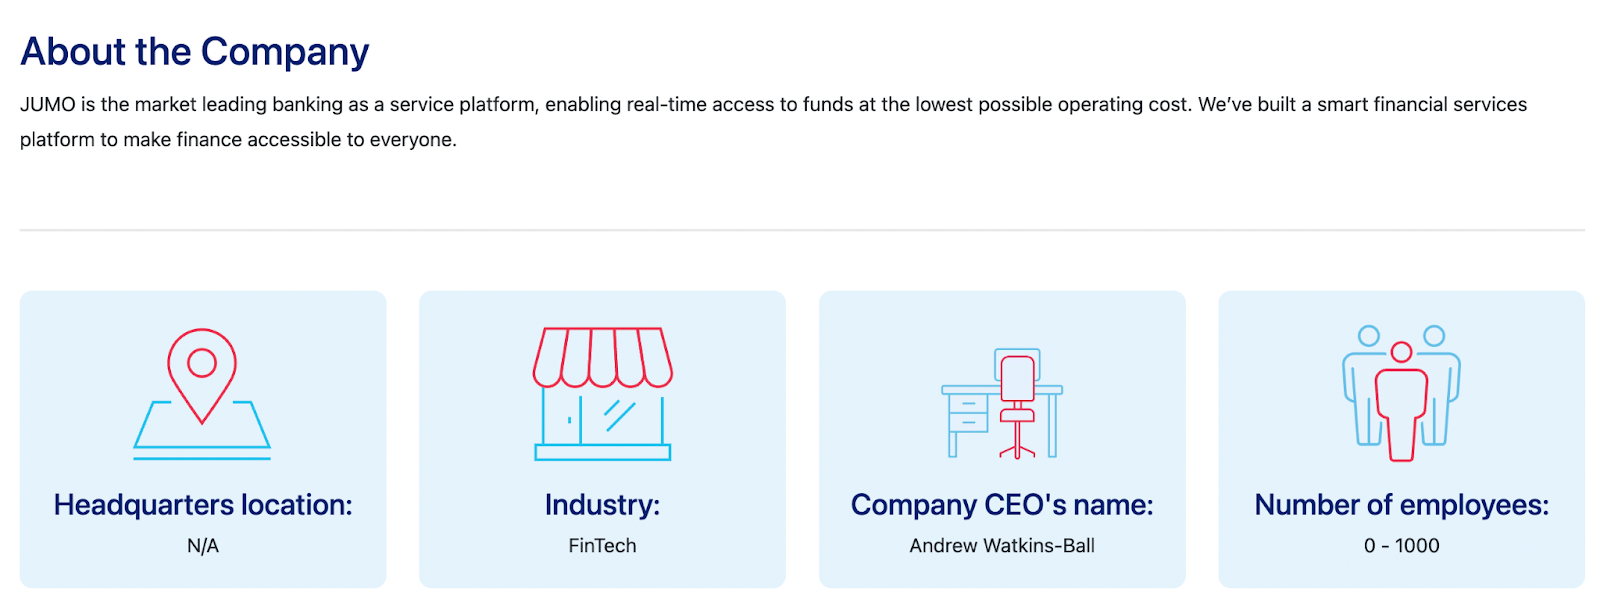 Headquarters: N/A Industry: FinTech Company CEO's Name: Andrew Watckins-Ball Number of Employees: 0 -1000